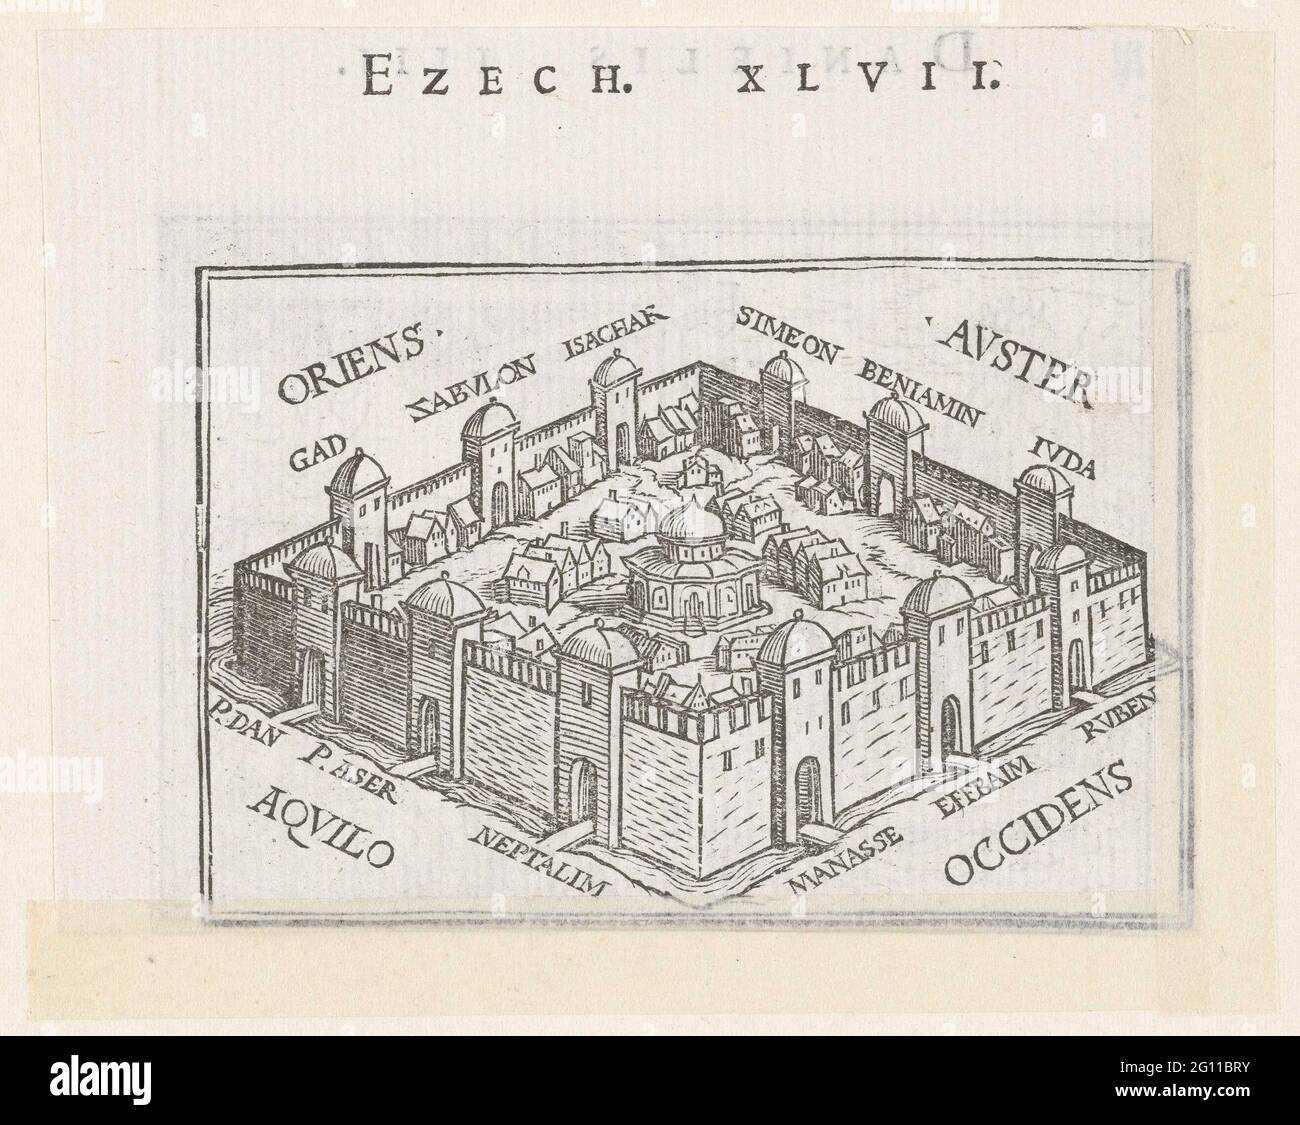 Heavenly city in vision of Ezekiel. The heavenly city with the new temple such as Ezekiel this sees in a vision. The wind directions are indicated and there are names of the tribes of Israel at the gates. The text Ezech is in the margin above the image. XLVII. Stock Photo